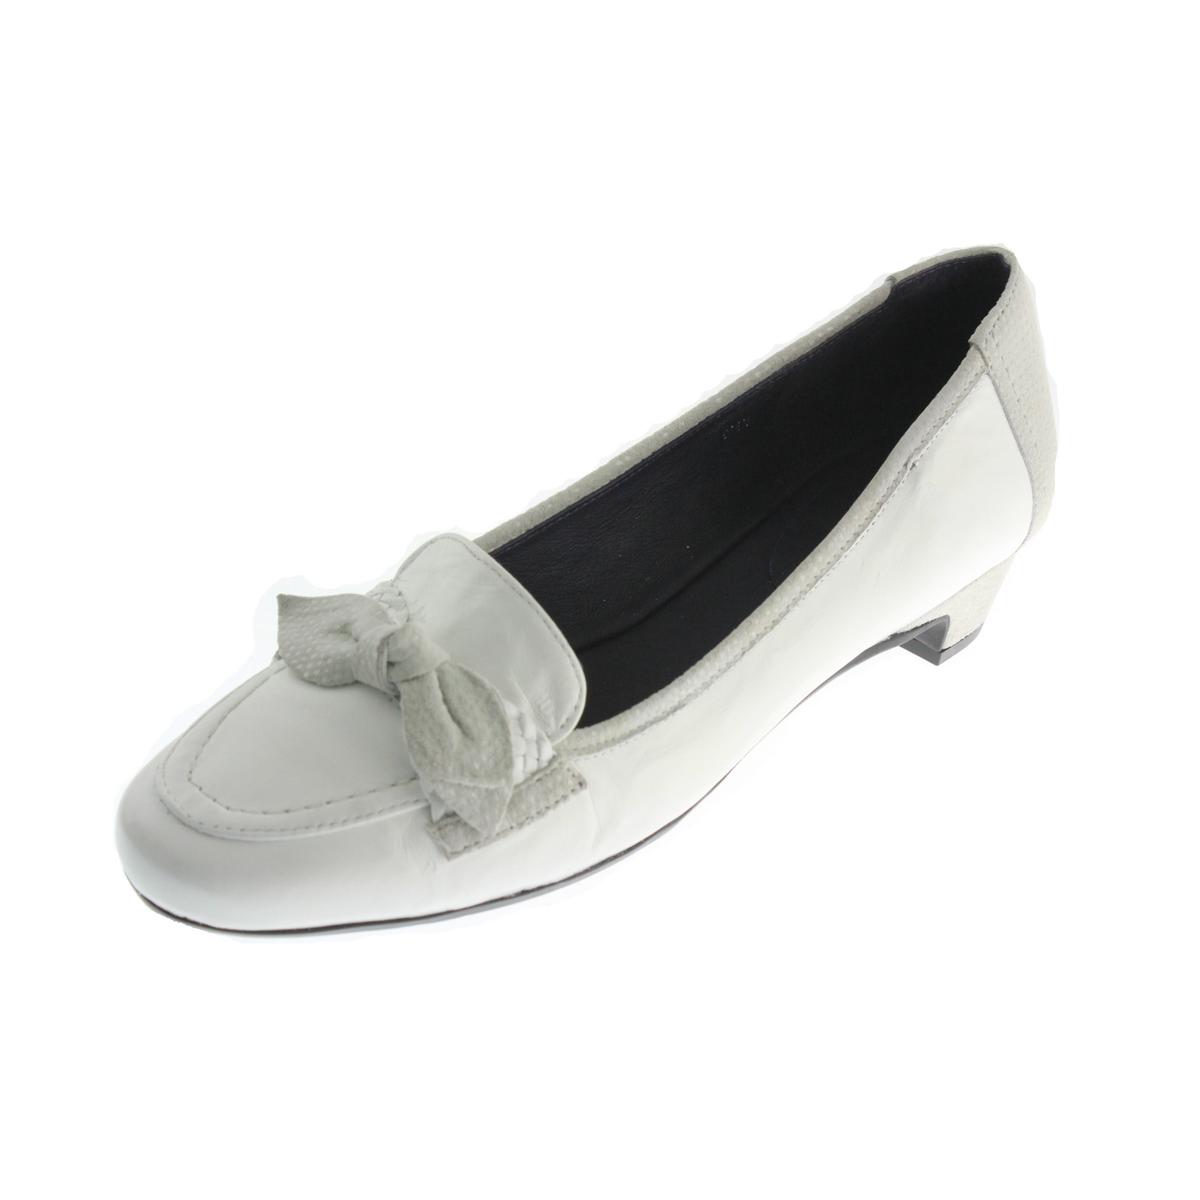 VANELi 2985 Womens White Leather Bow Loafers Shoes 9.5 Narrow (AA,N ...